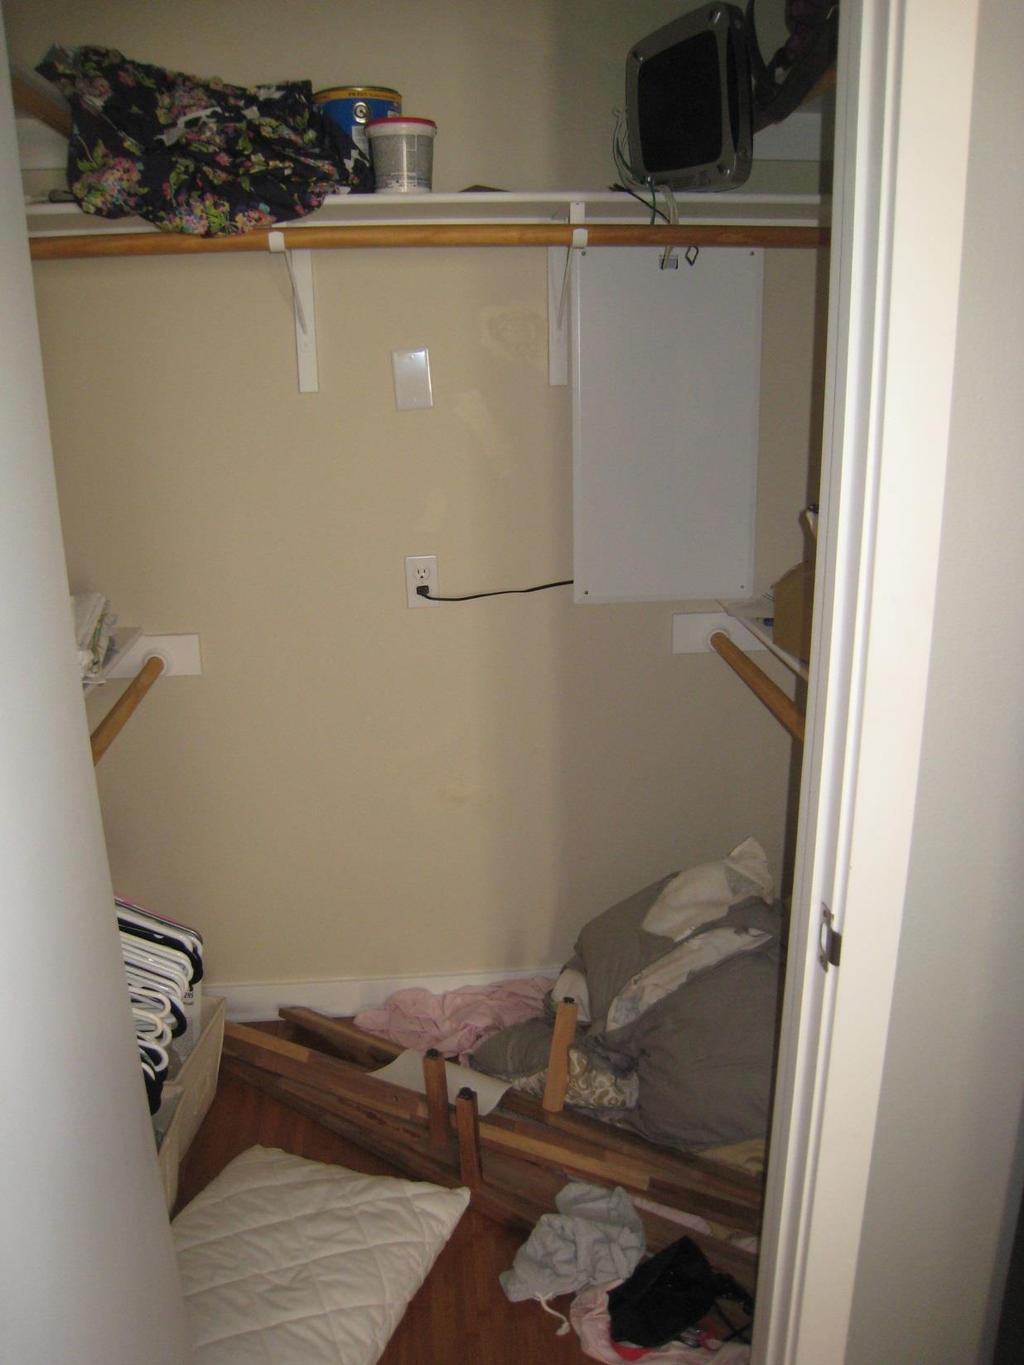 The walk-in closet in the master bedroom was rarely used and contained a